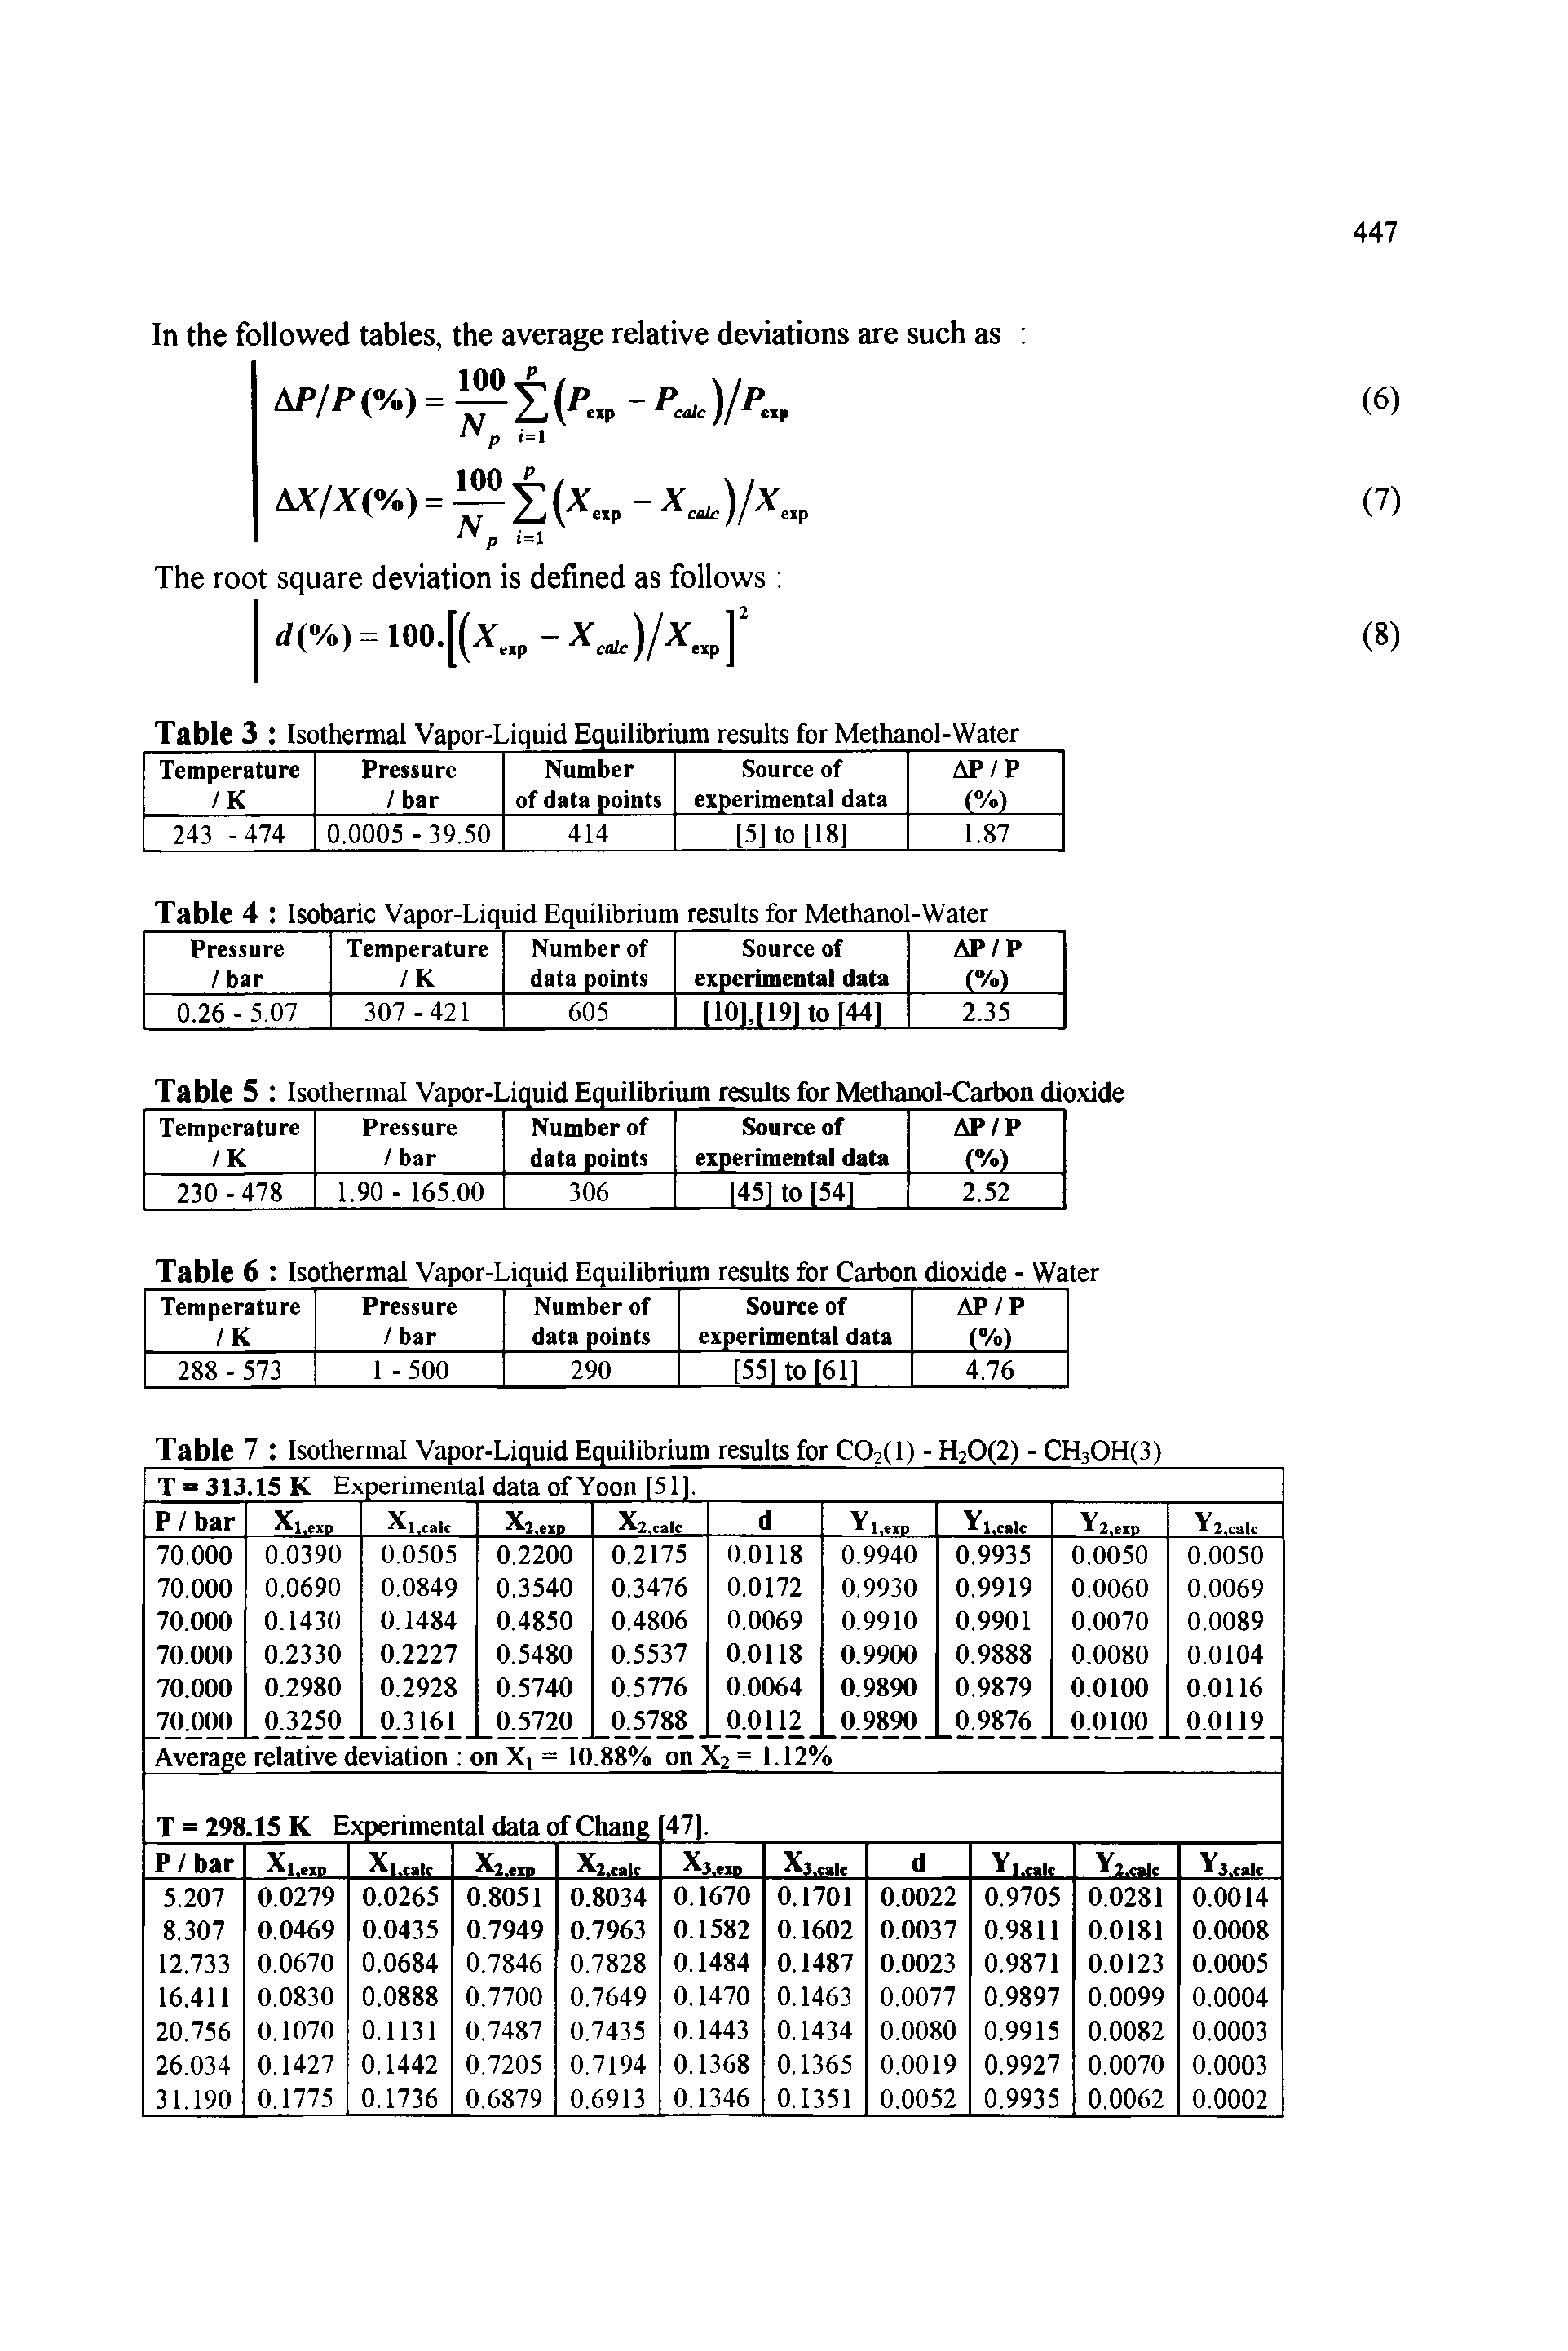 Table 4 Isobaric Vapor-Liquid Equilibrium results for Methanol-Water...